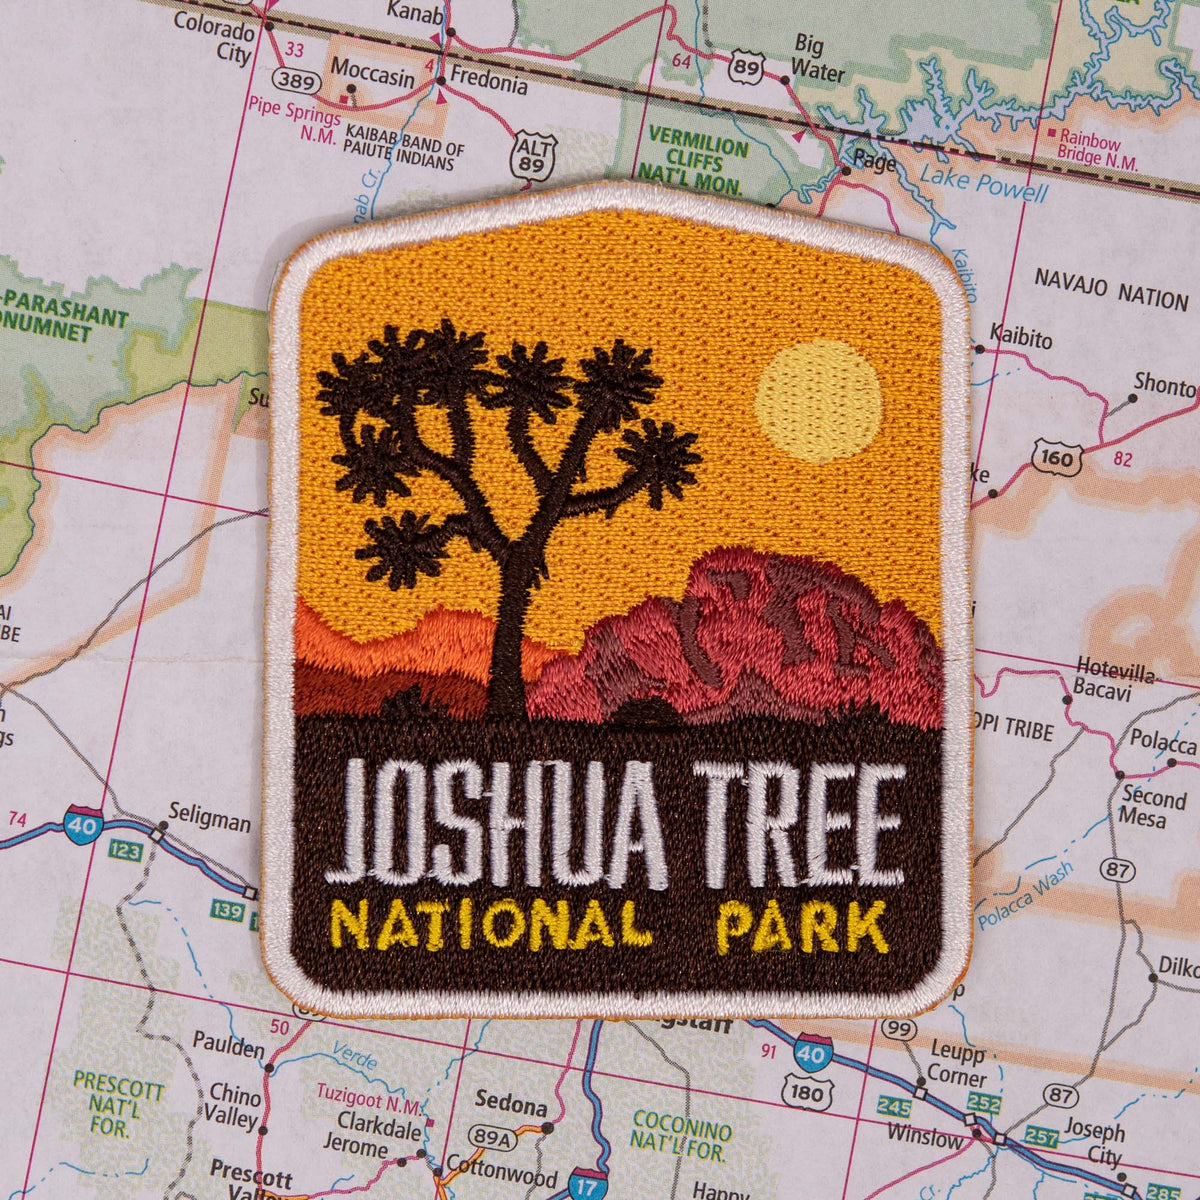 Joshua Tree National Park Patch – hikeanddraw